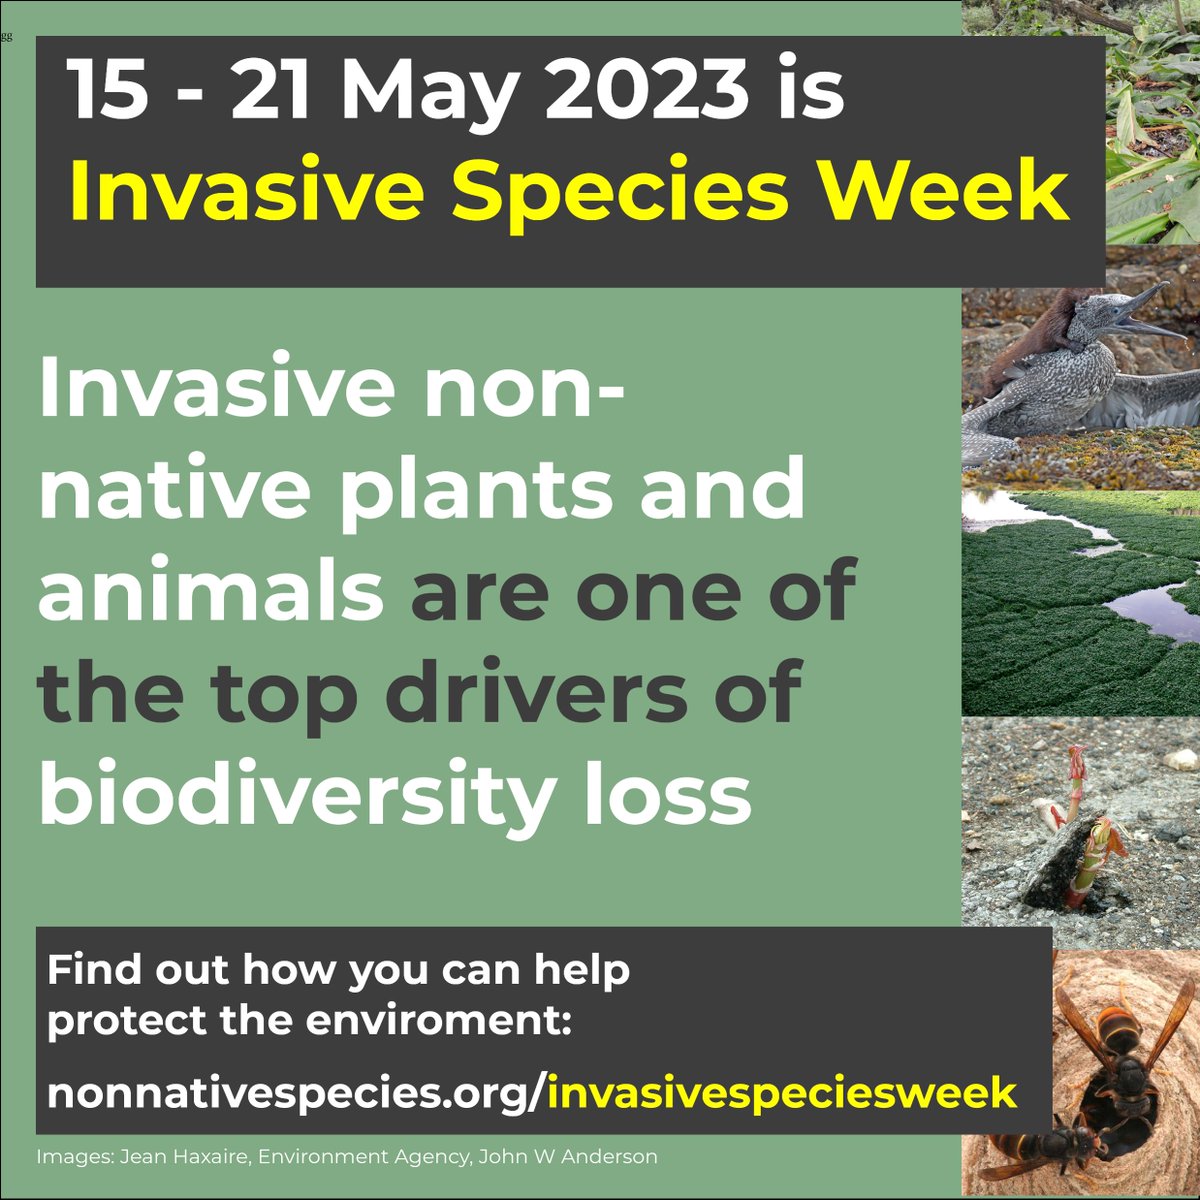 Less than two weeks to go! 

It's not too late to get involved, find out more at #InvasiveSpeciesWeek nonnativespecies.org/invasivespecie…